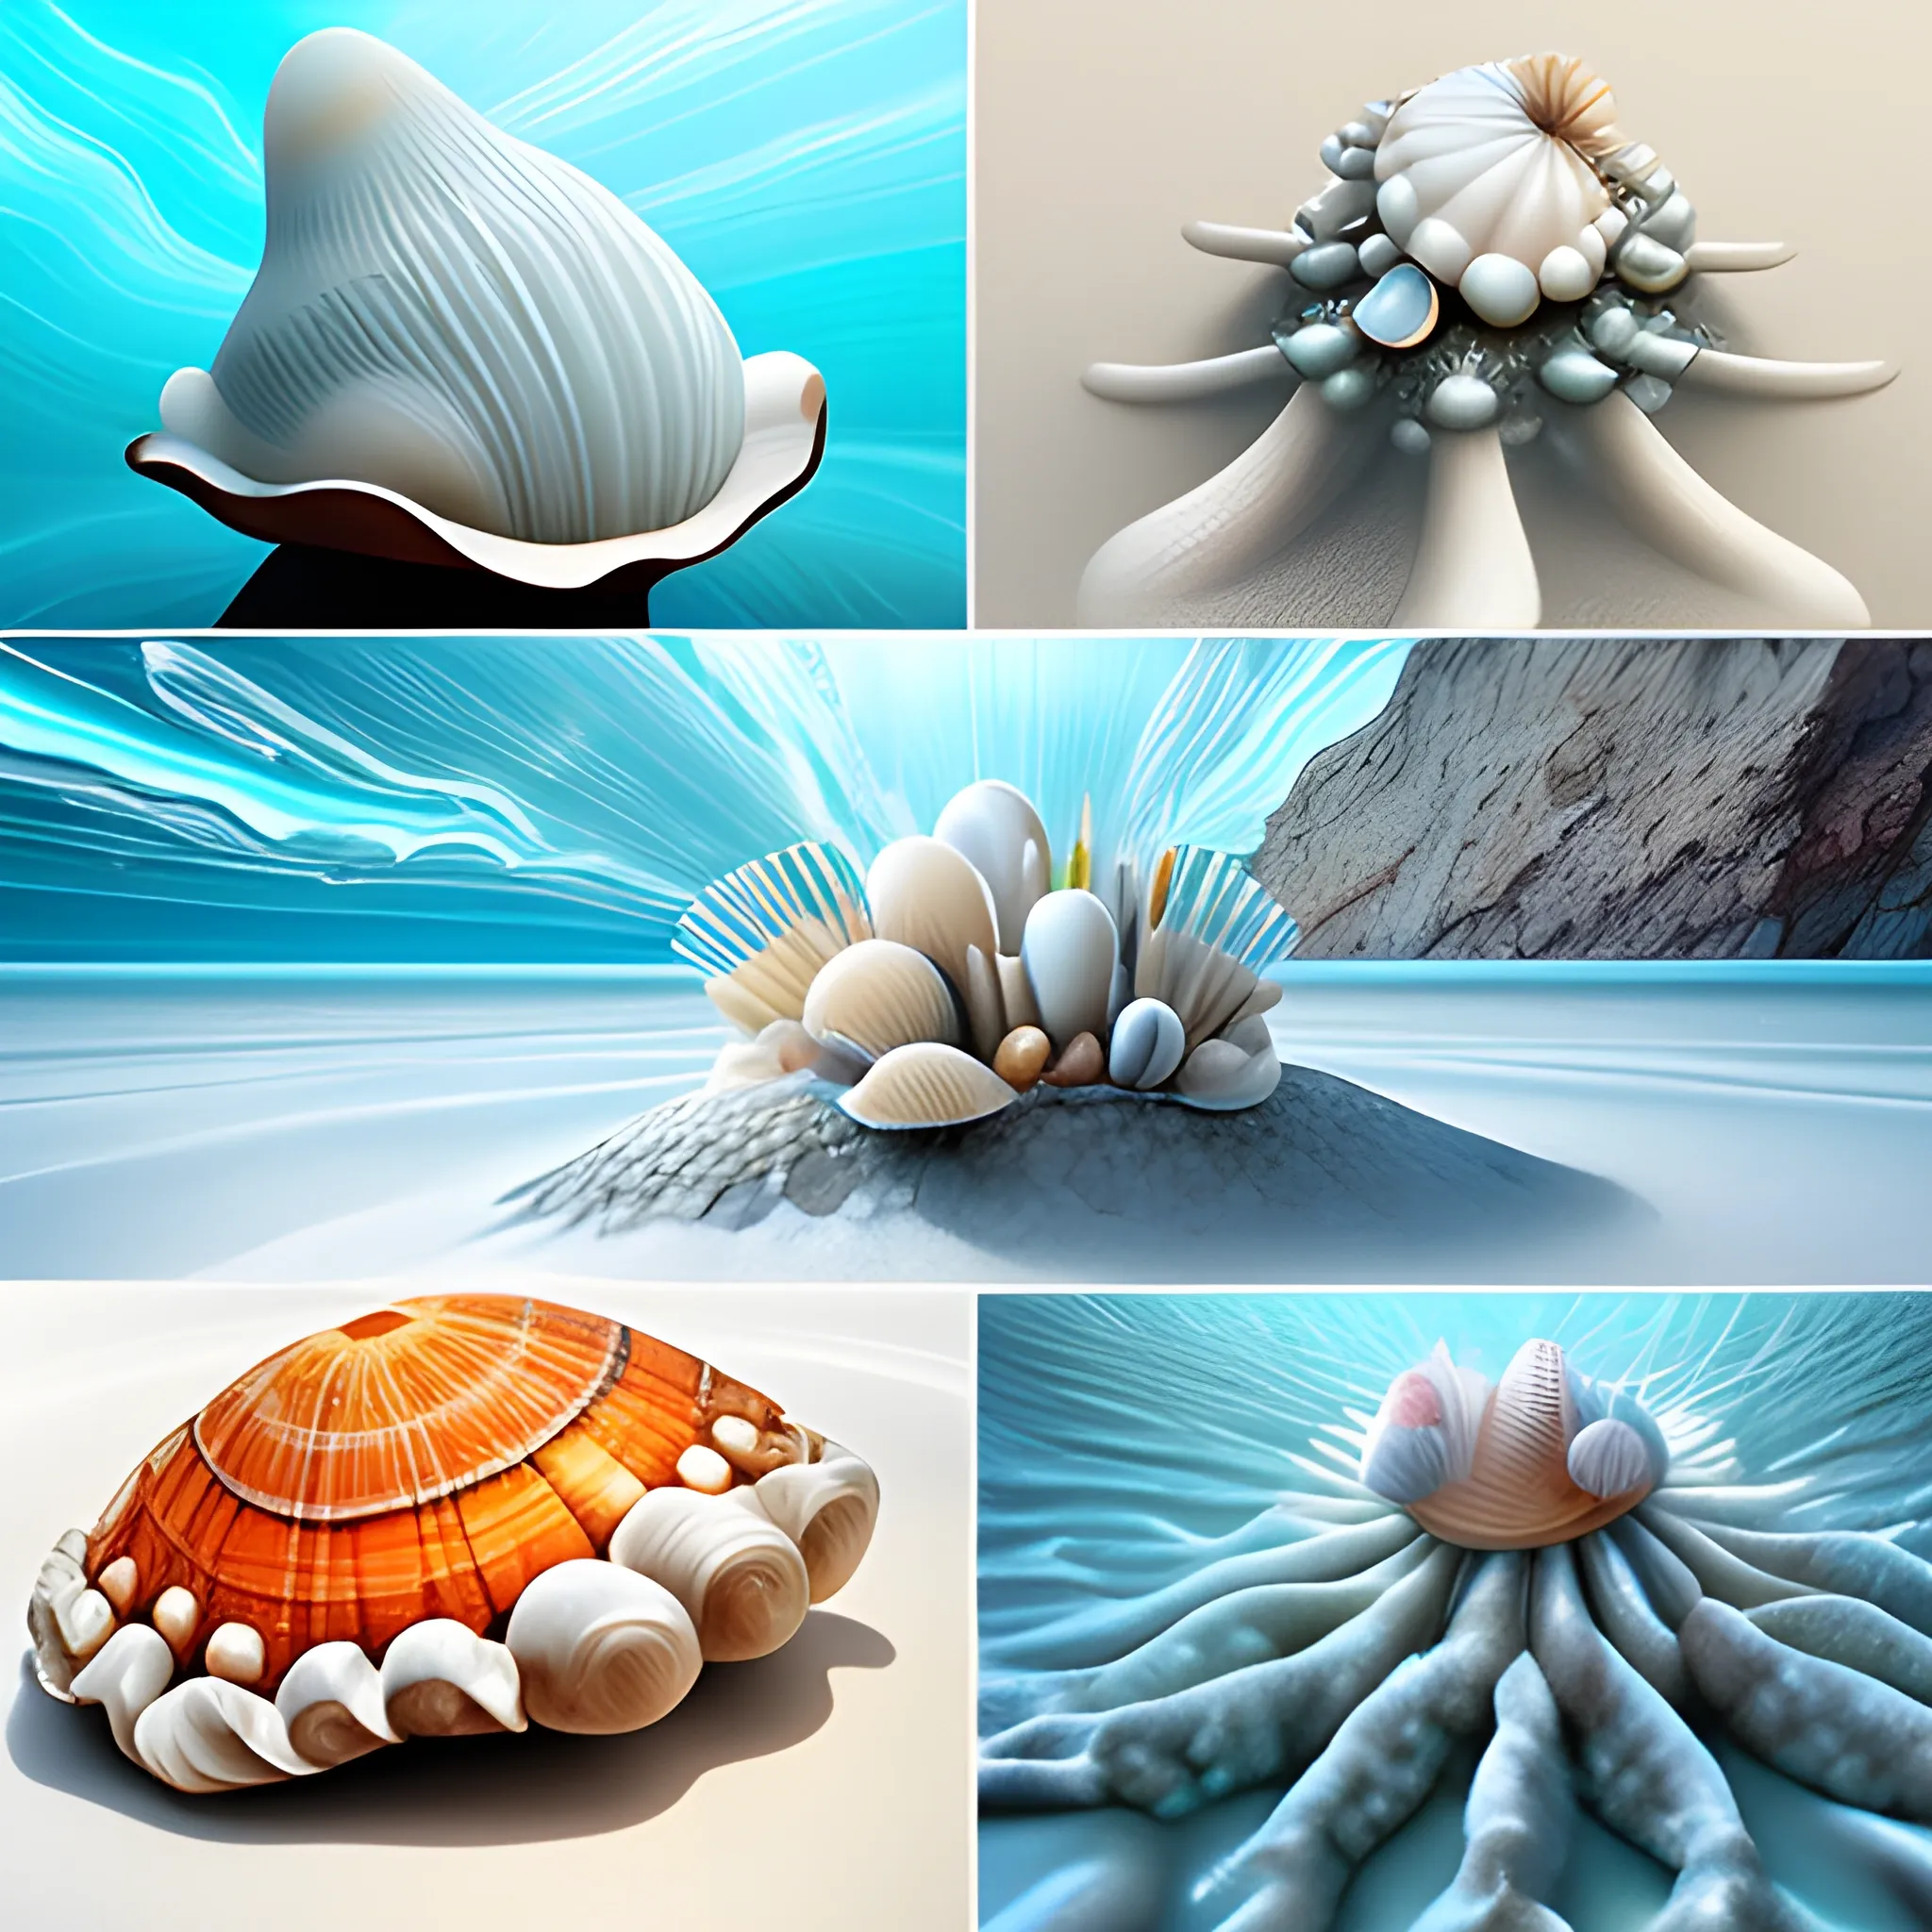 Digital Art, close-up macro shots of unusual sea creatures among dazzling white sands and vivid shells on the seafloor using available light, in the style of science fiction concept art.